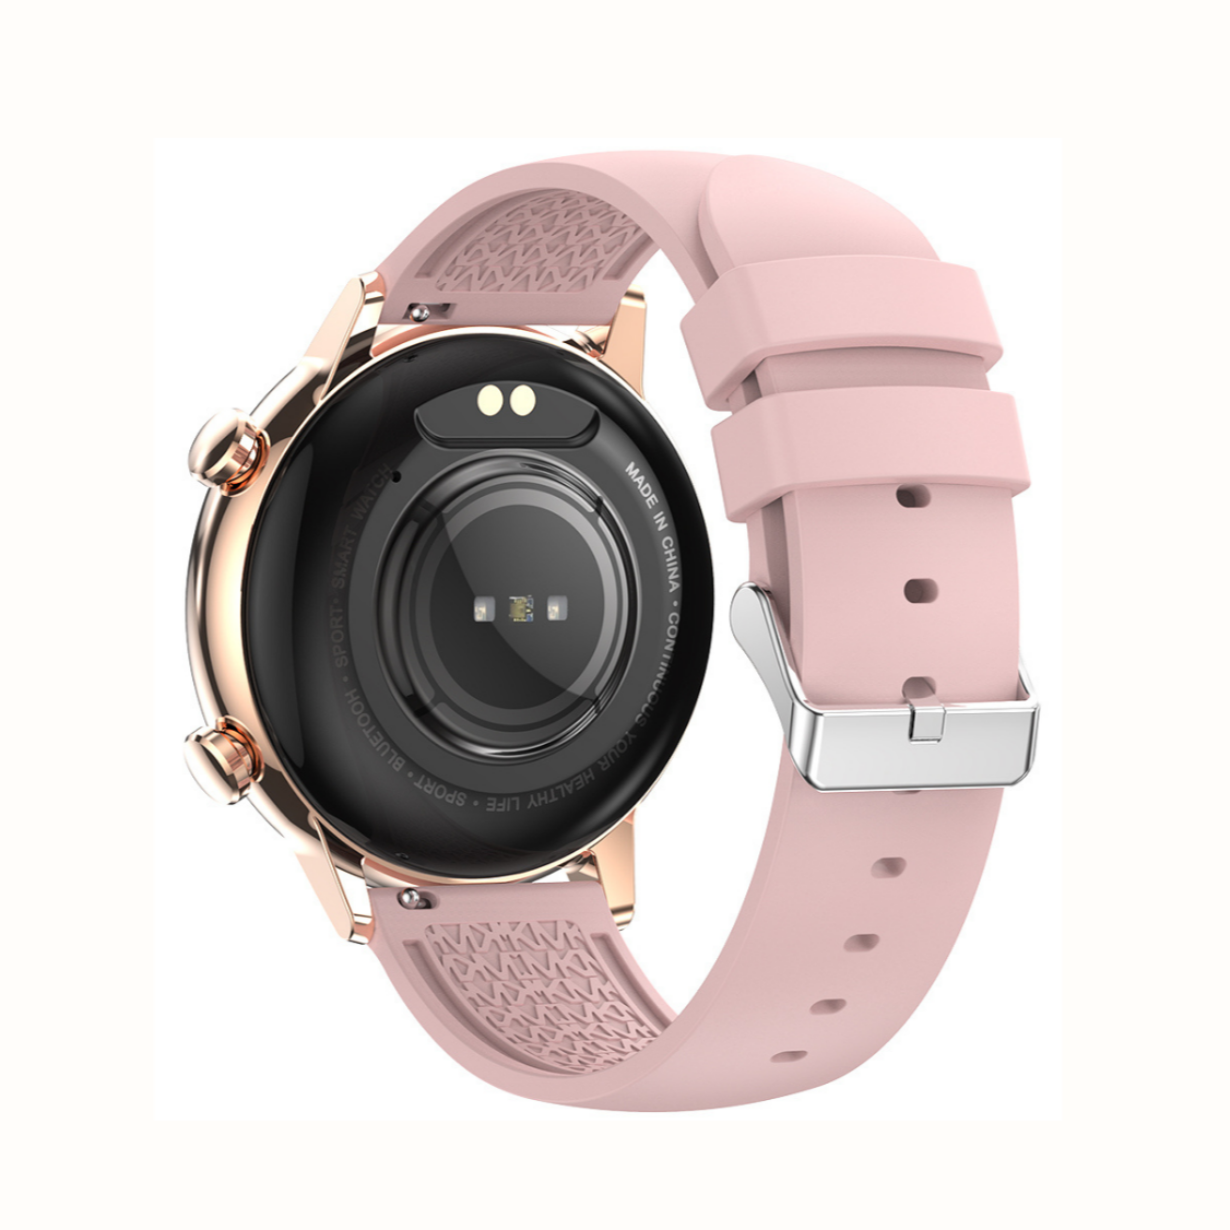 HK39 Women Smartwatch, AMOLED Display, Setup with Android device, Setup with Apple Device, Water resistance - IP68, Best Smart Watch, 2023, Track Activity,Track WOmens Health, Pedometer, Calorie Monitor, Sleep Tracking, Heart Rate Monitor, Blood Oxygen Monitor- Spo2, Multisport Mode, Color - Pink